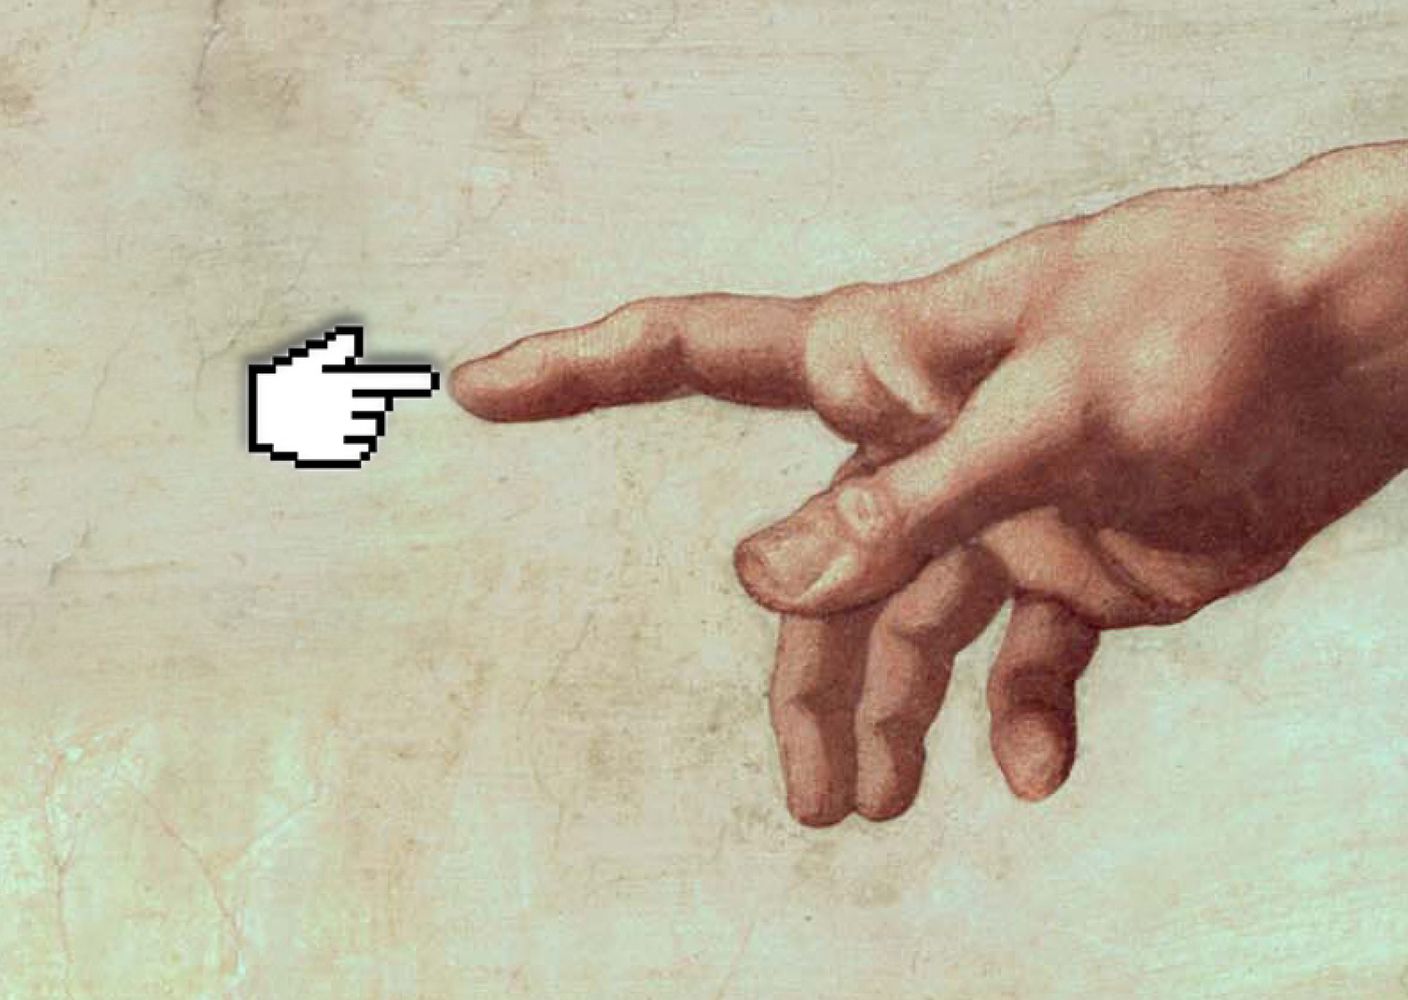 The hand of God from Michelangelo's sistine chapel touches a digital hand